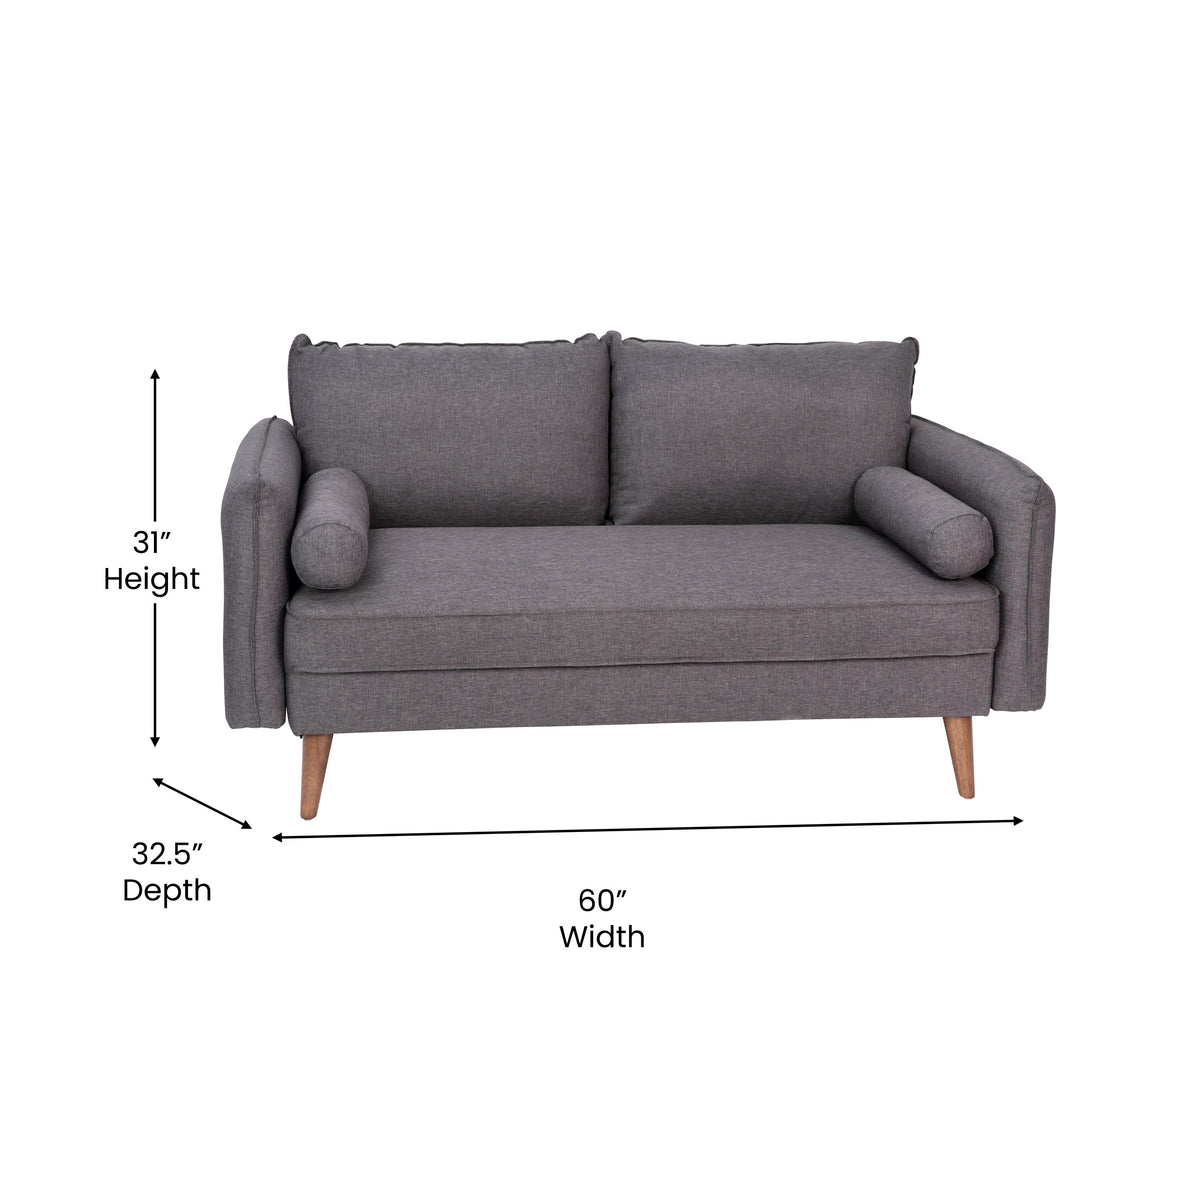 Stone Gray |#| Compact Stone Gray Faux Linen Upholstered Loveseat with Wooden Legs